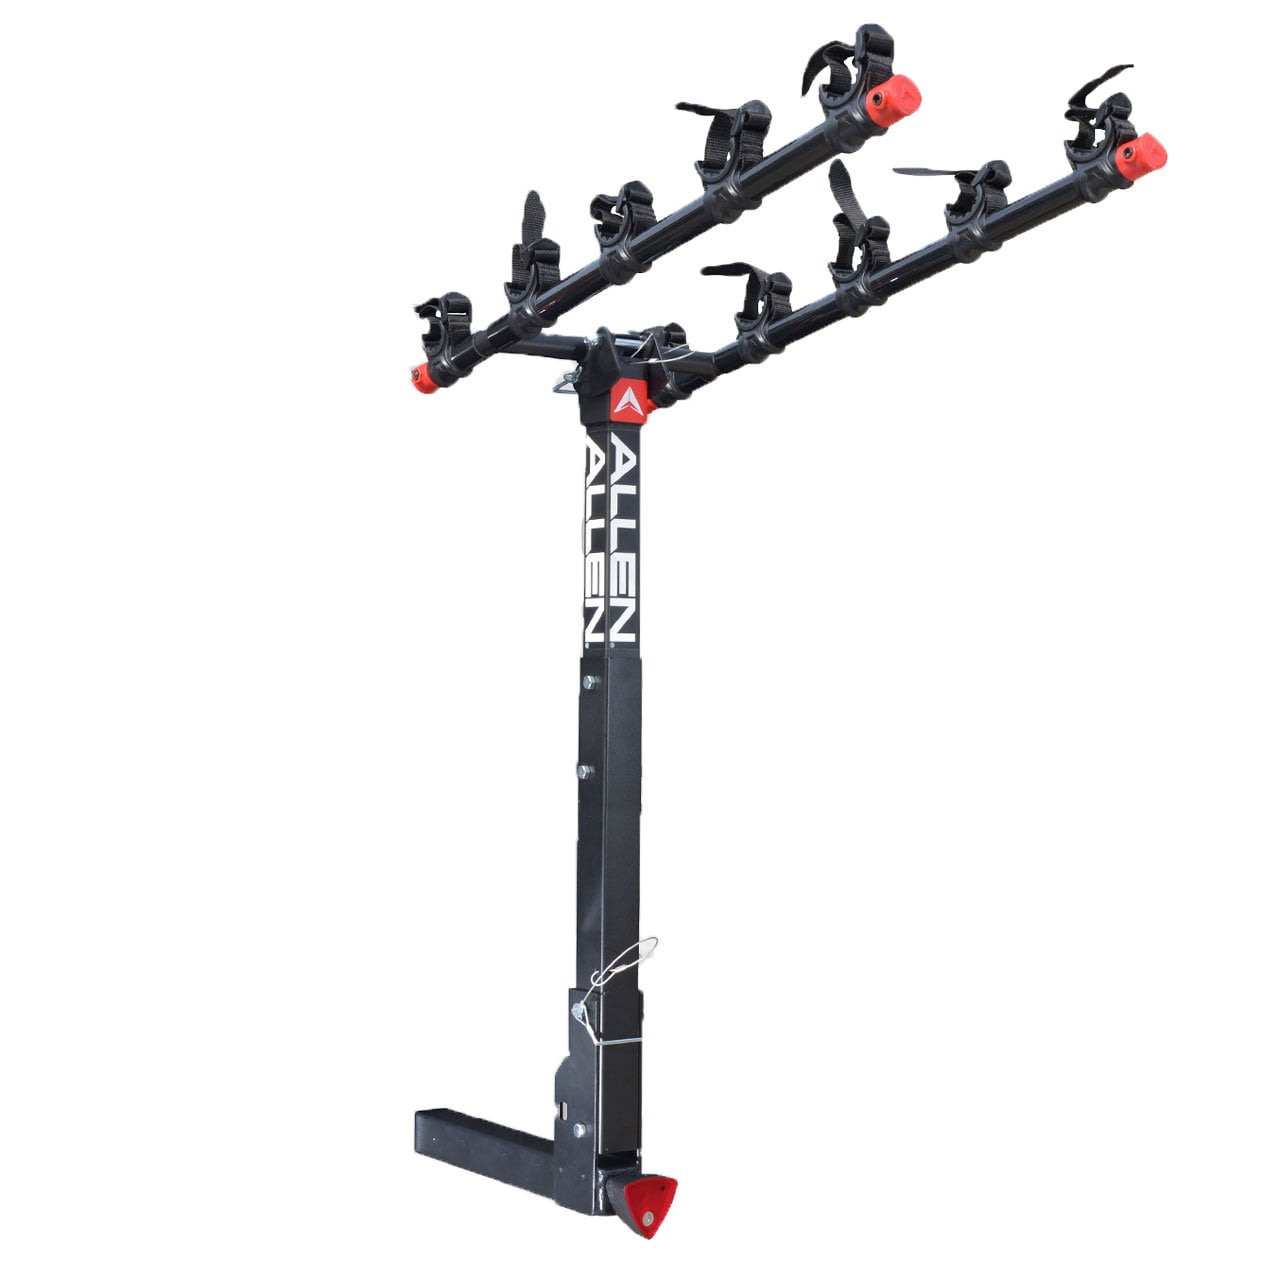 542RR Allen Sports Deluxe 4-Bicycle Hitch Mounted Bike Rack Carrier 